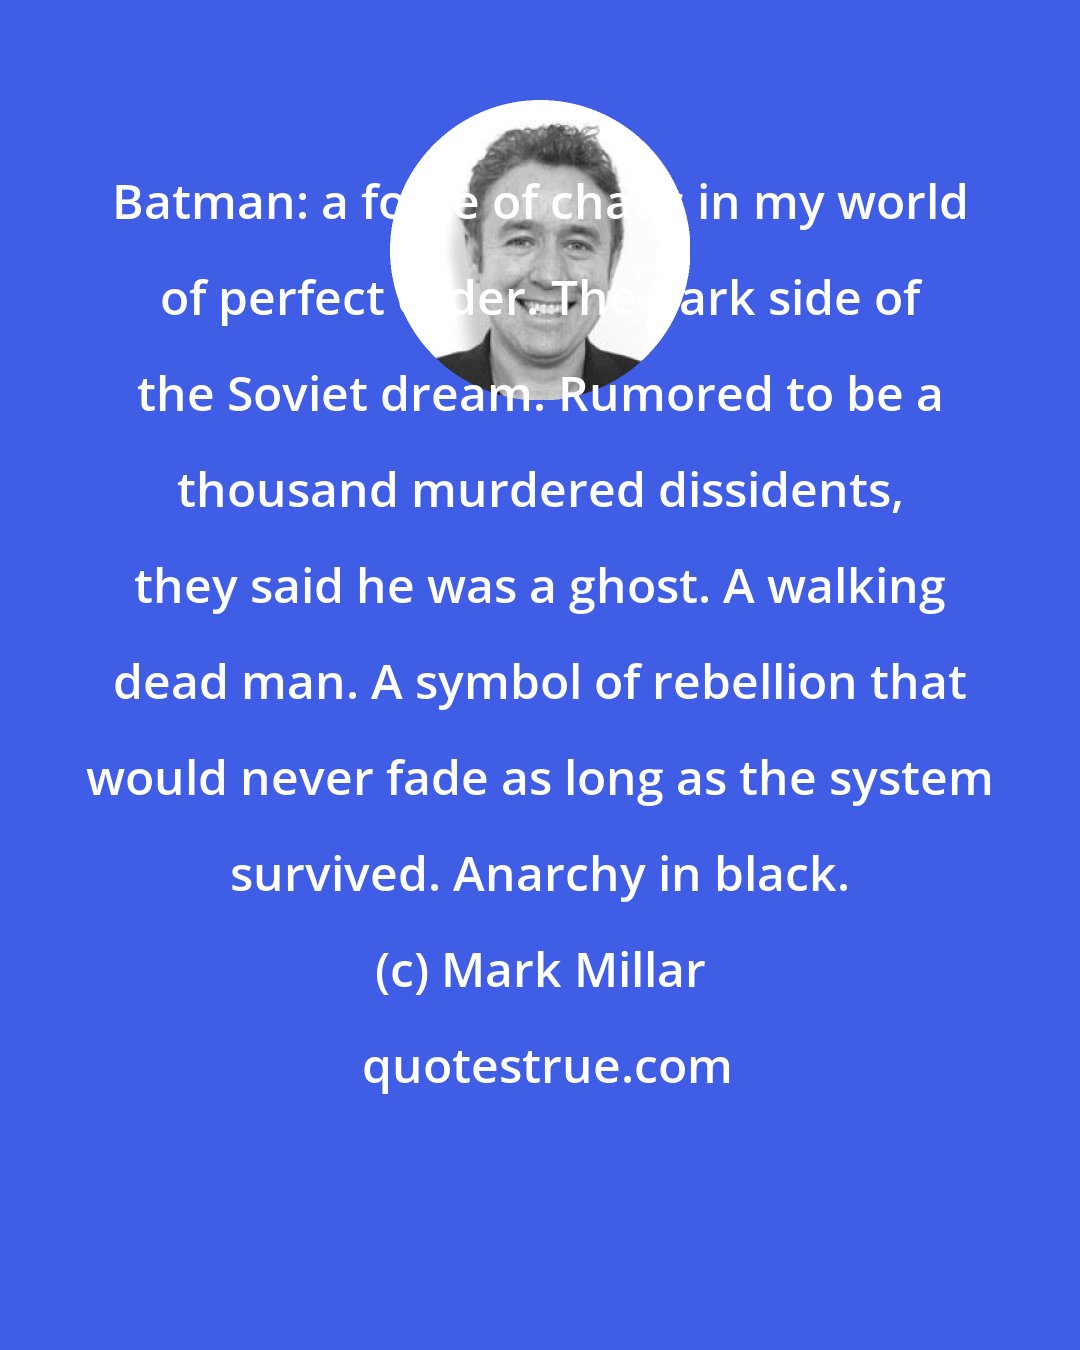 Mark Millar: Batman: a force of chaos in my world of perfect order. The dark side of the Soviet dream. Rumored to be a thousand murdered dissidents, they said he was a ghost. A walking dead man. A symbol of rebellion that would never fade as long as the system survived. Anarchy in black.